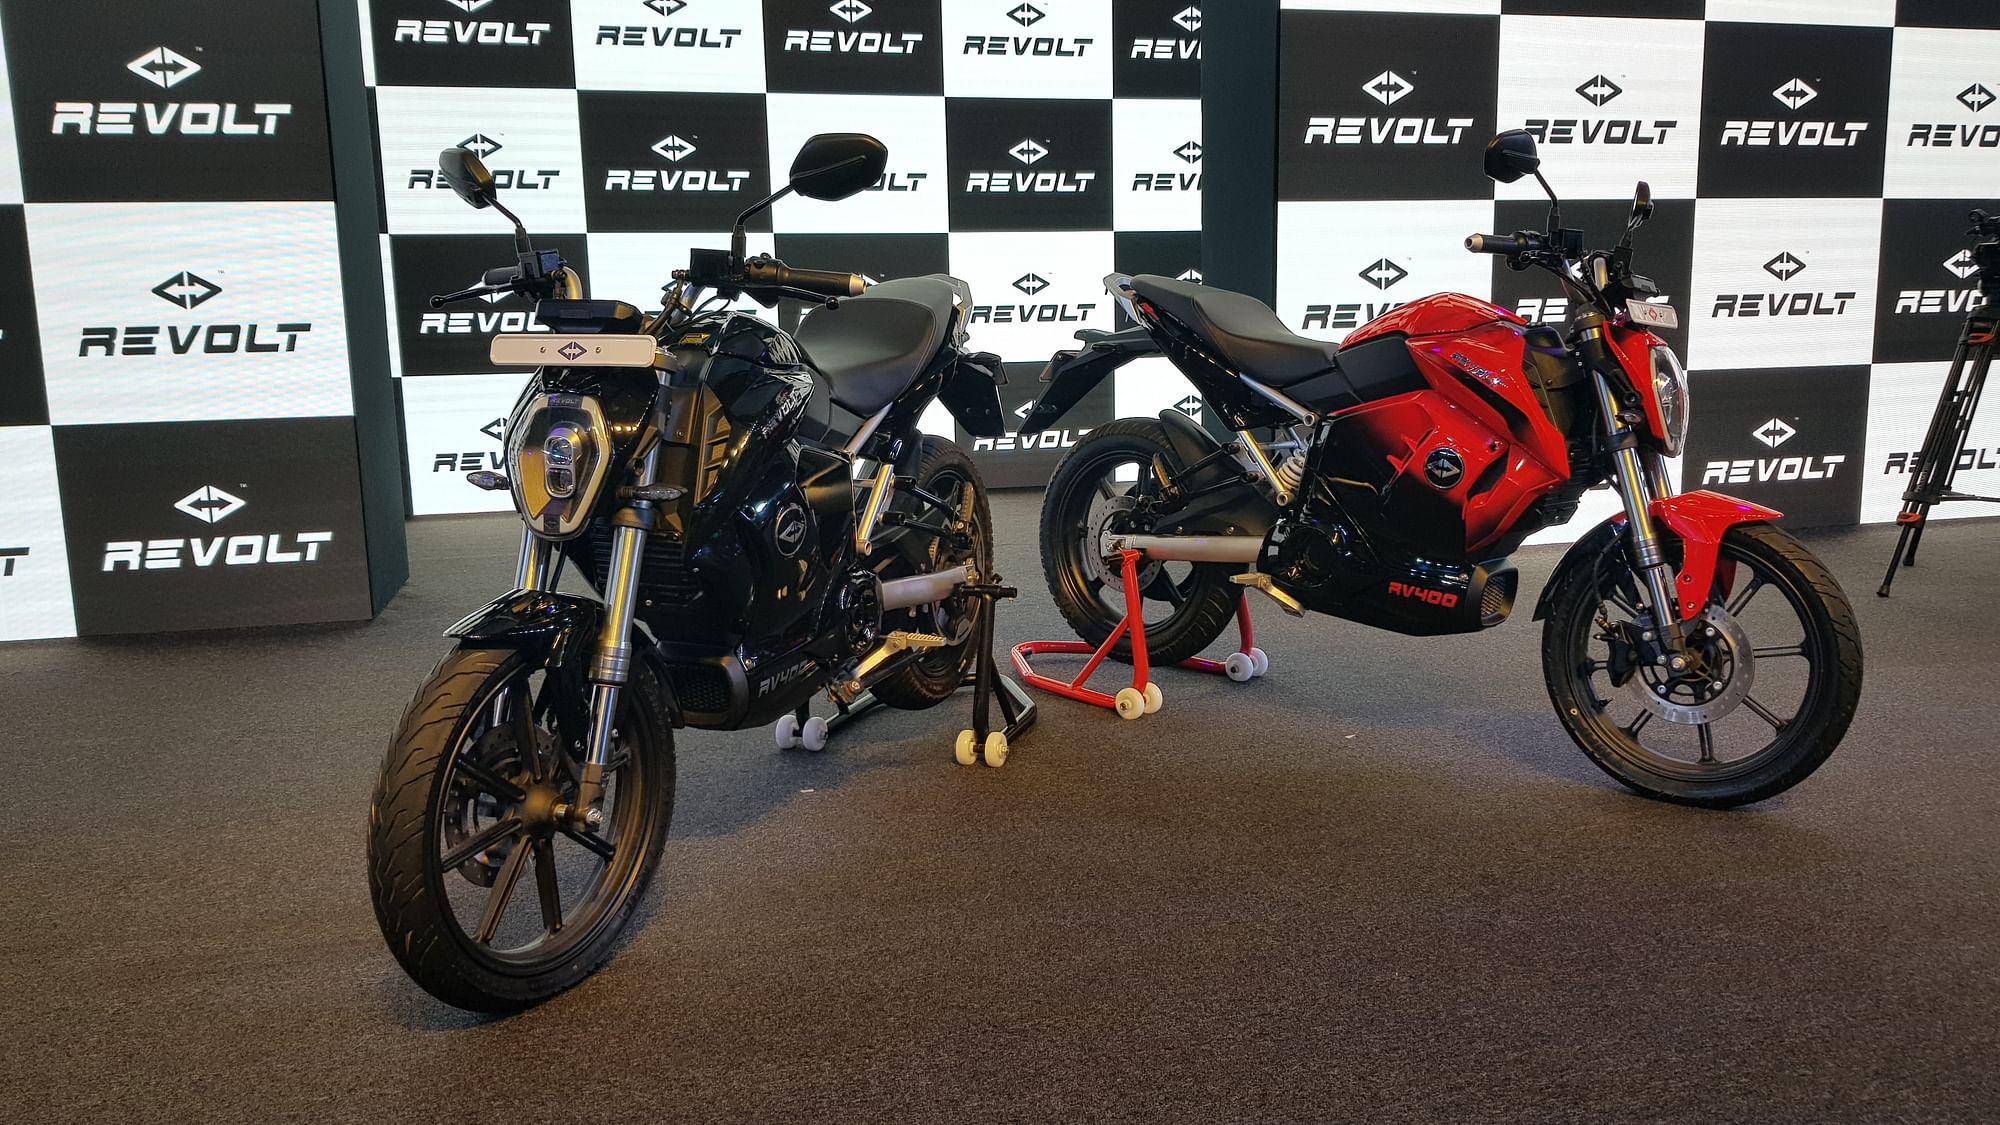 The Revolt RV400's prices will be announced in July 2019.